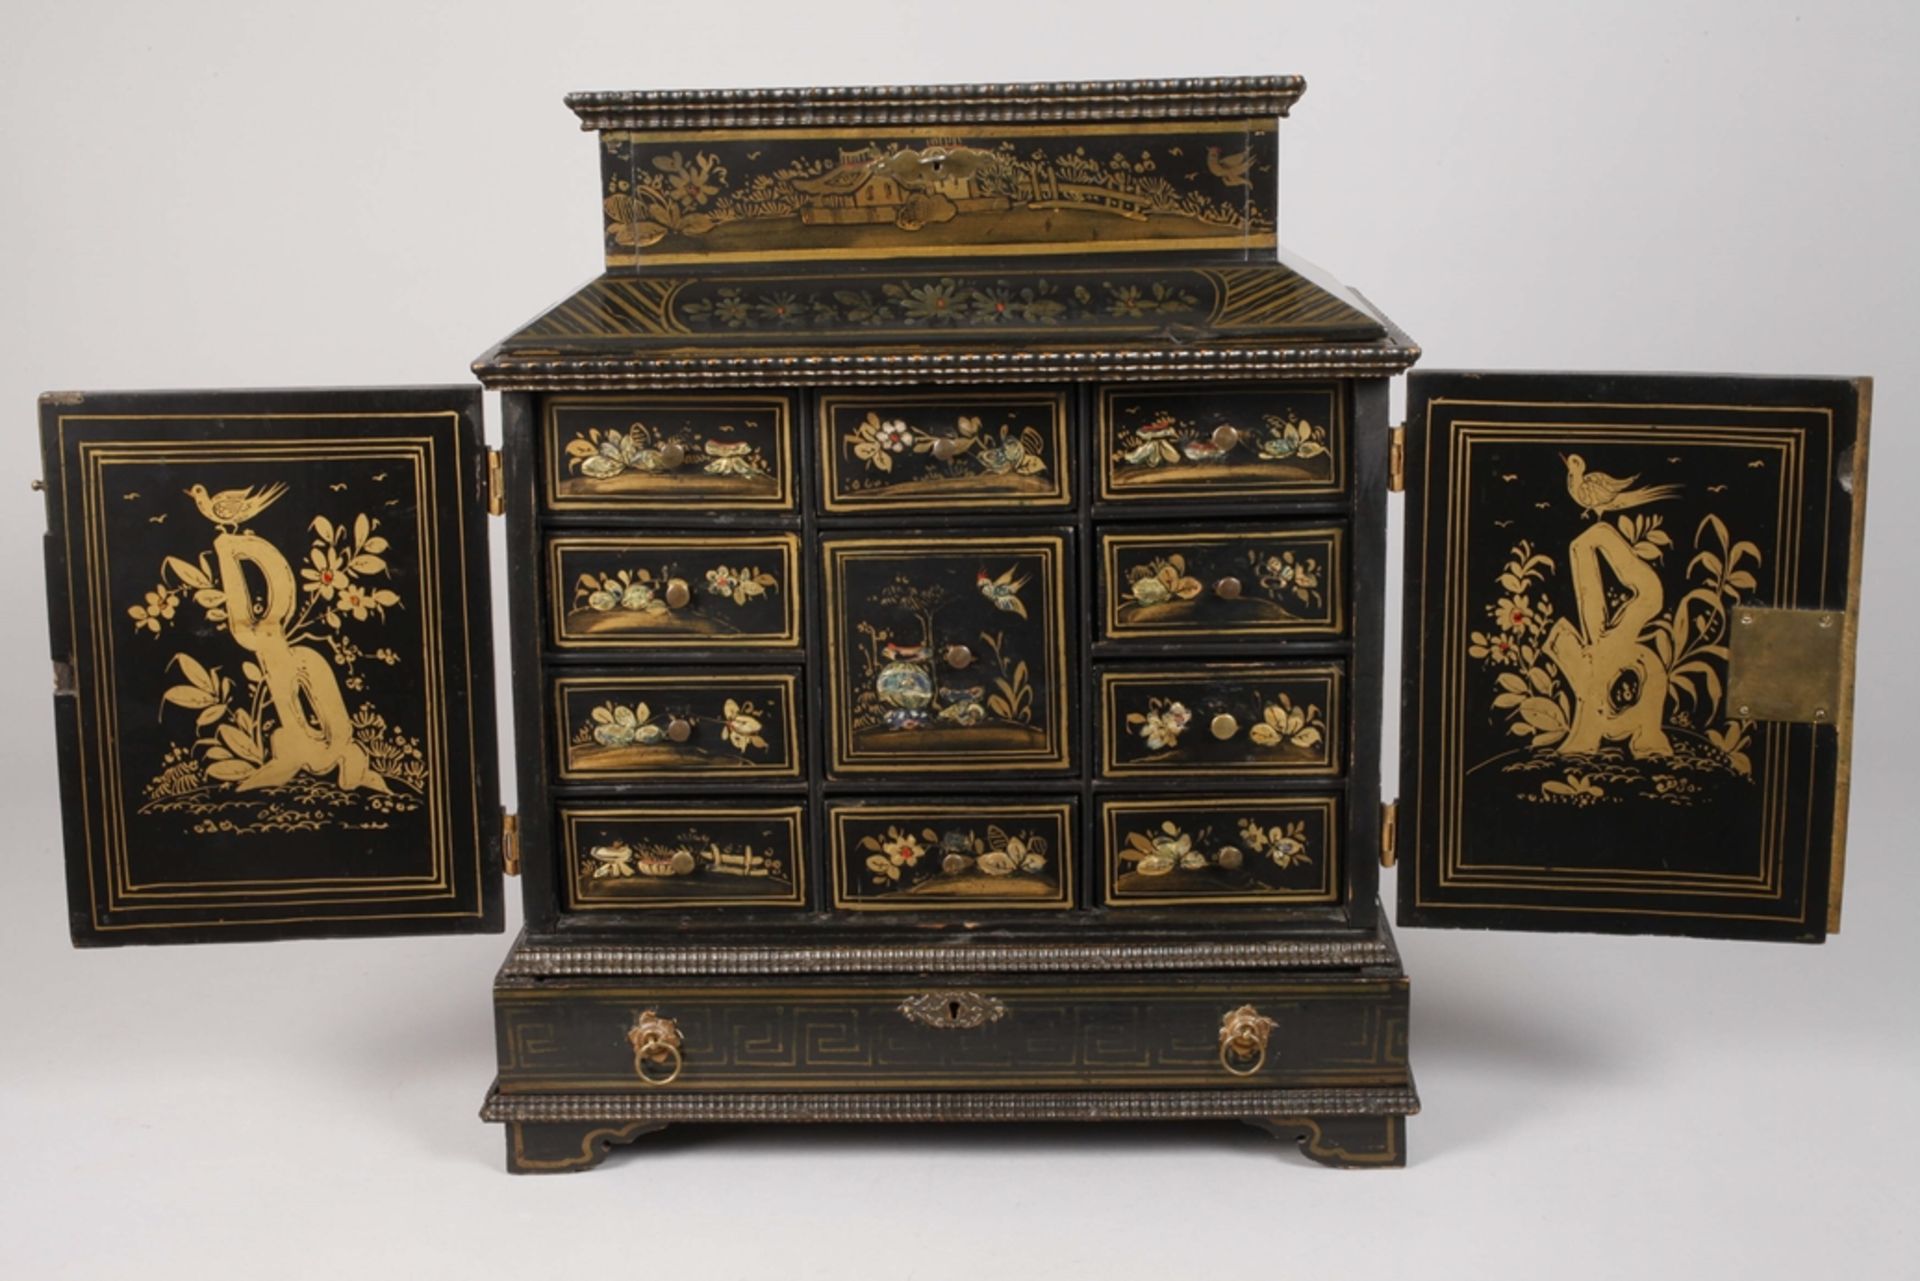 Small lacquer cabinet - Image 4 of 8